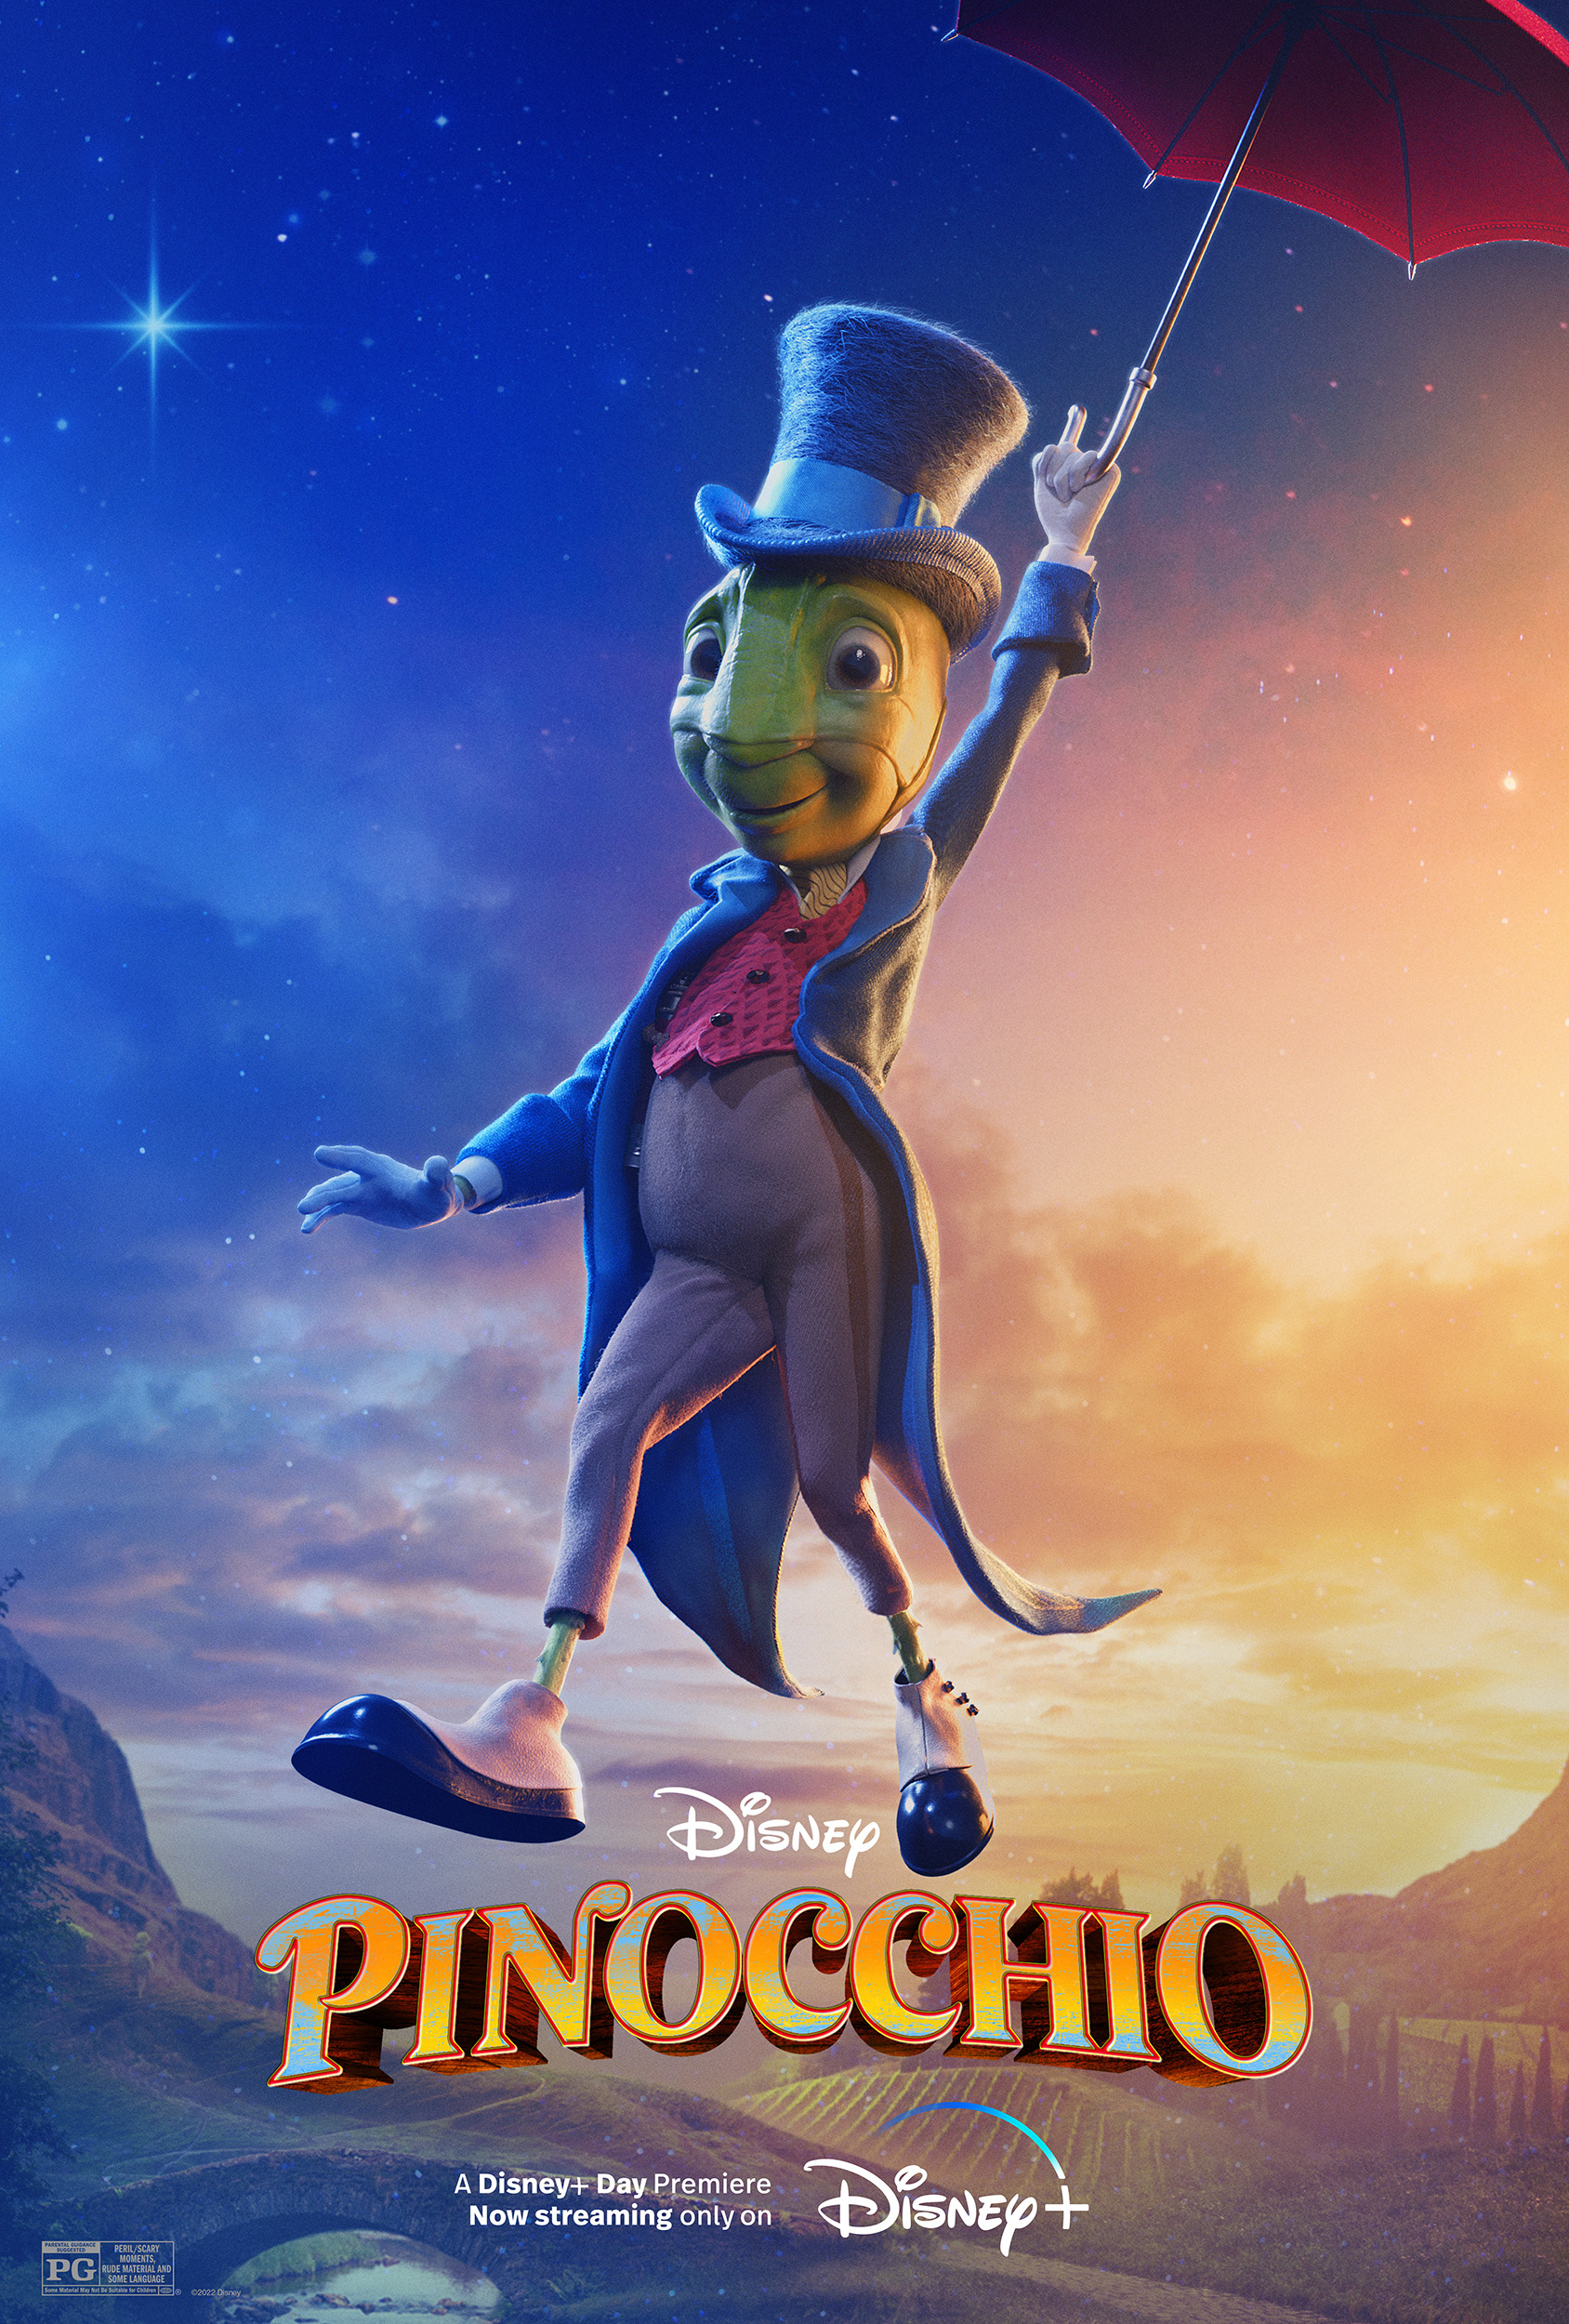 Mega Sized Movie Poster Image for Pinocchio (#5 of 17)